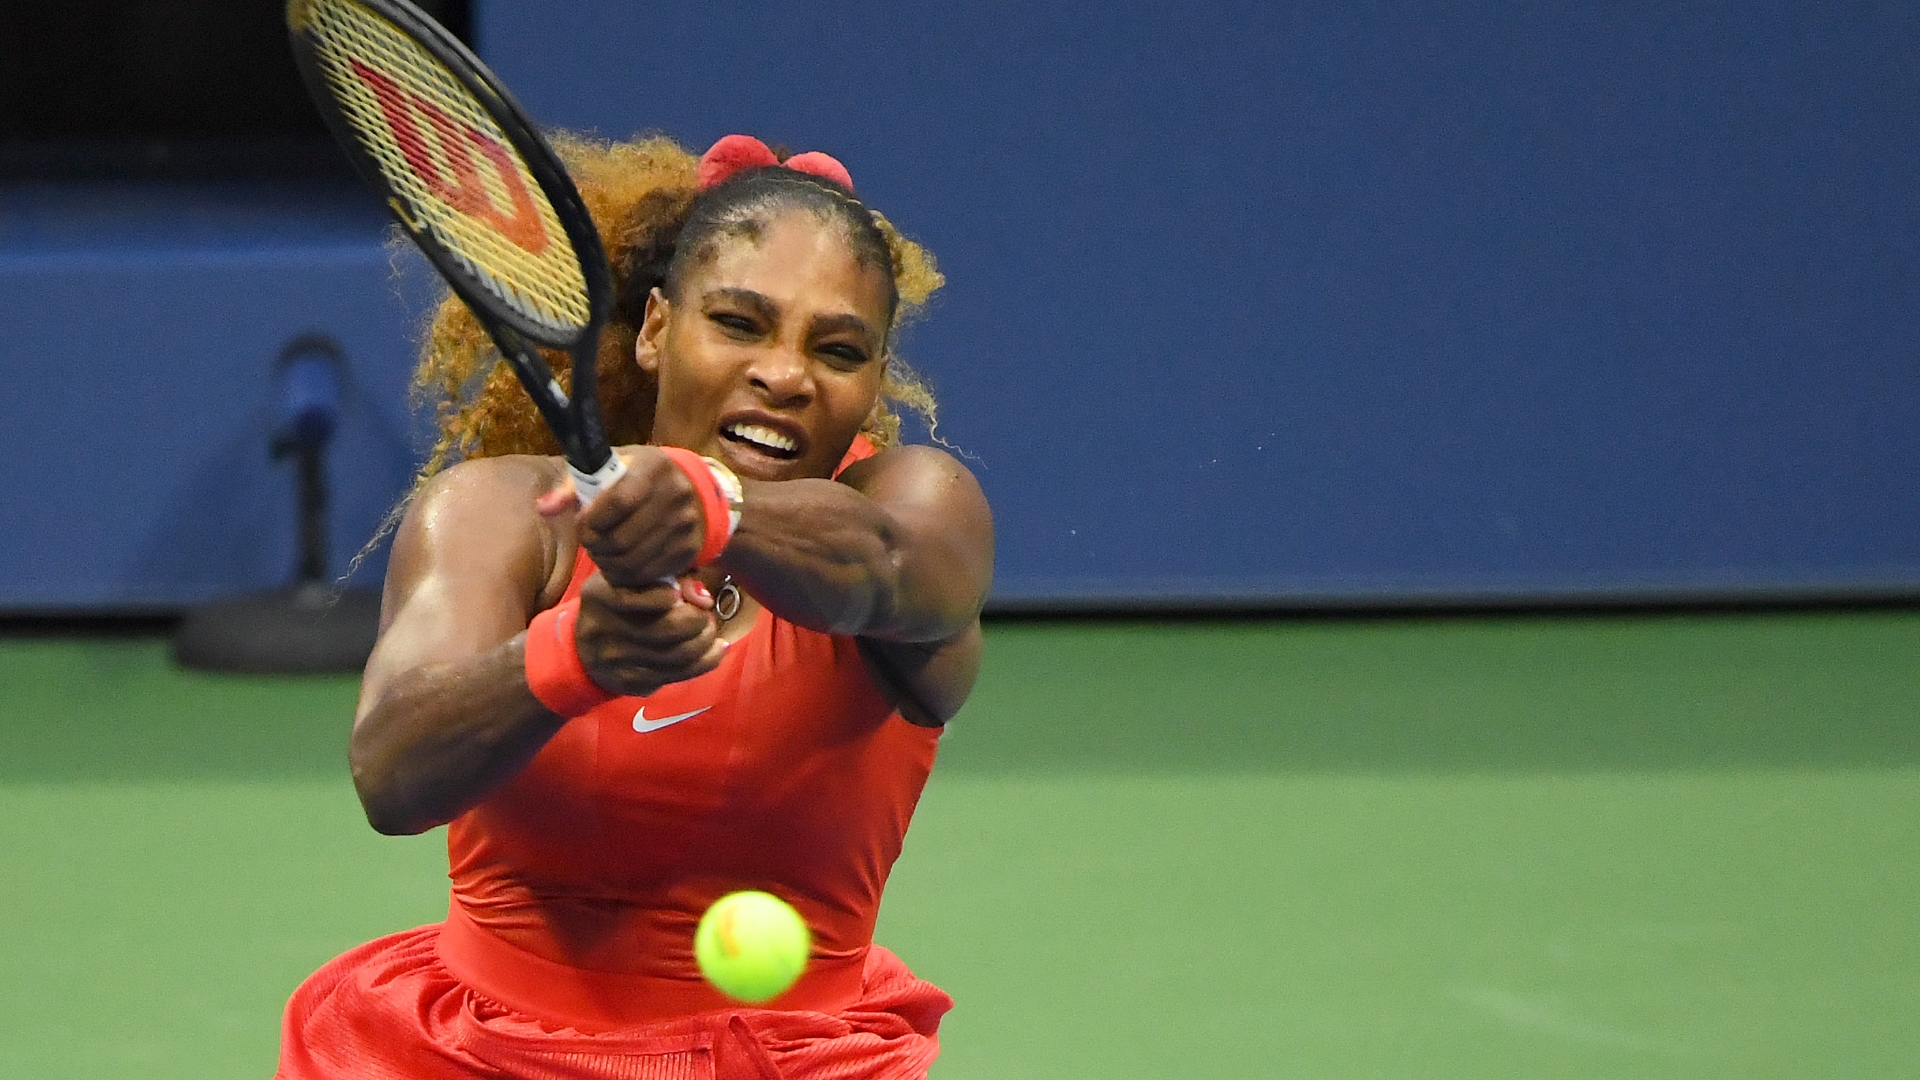 Serena advances to second round of US Open